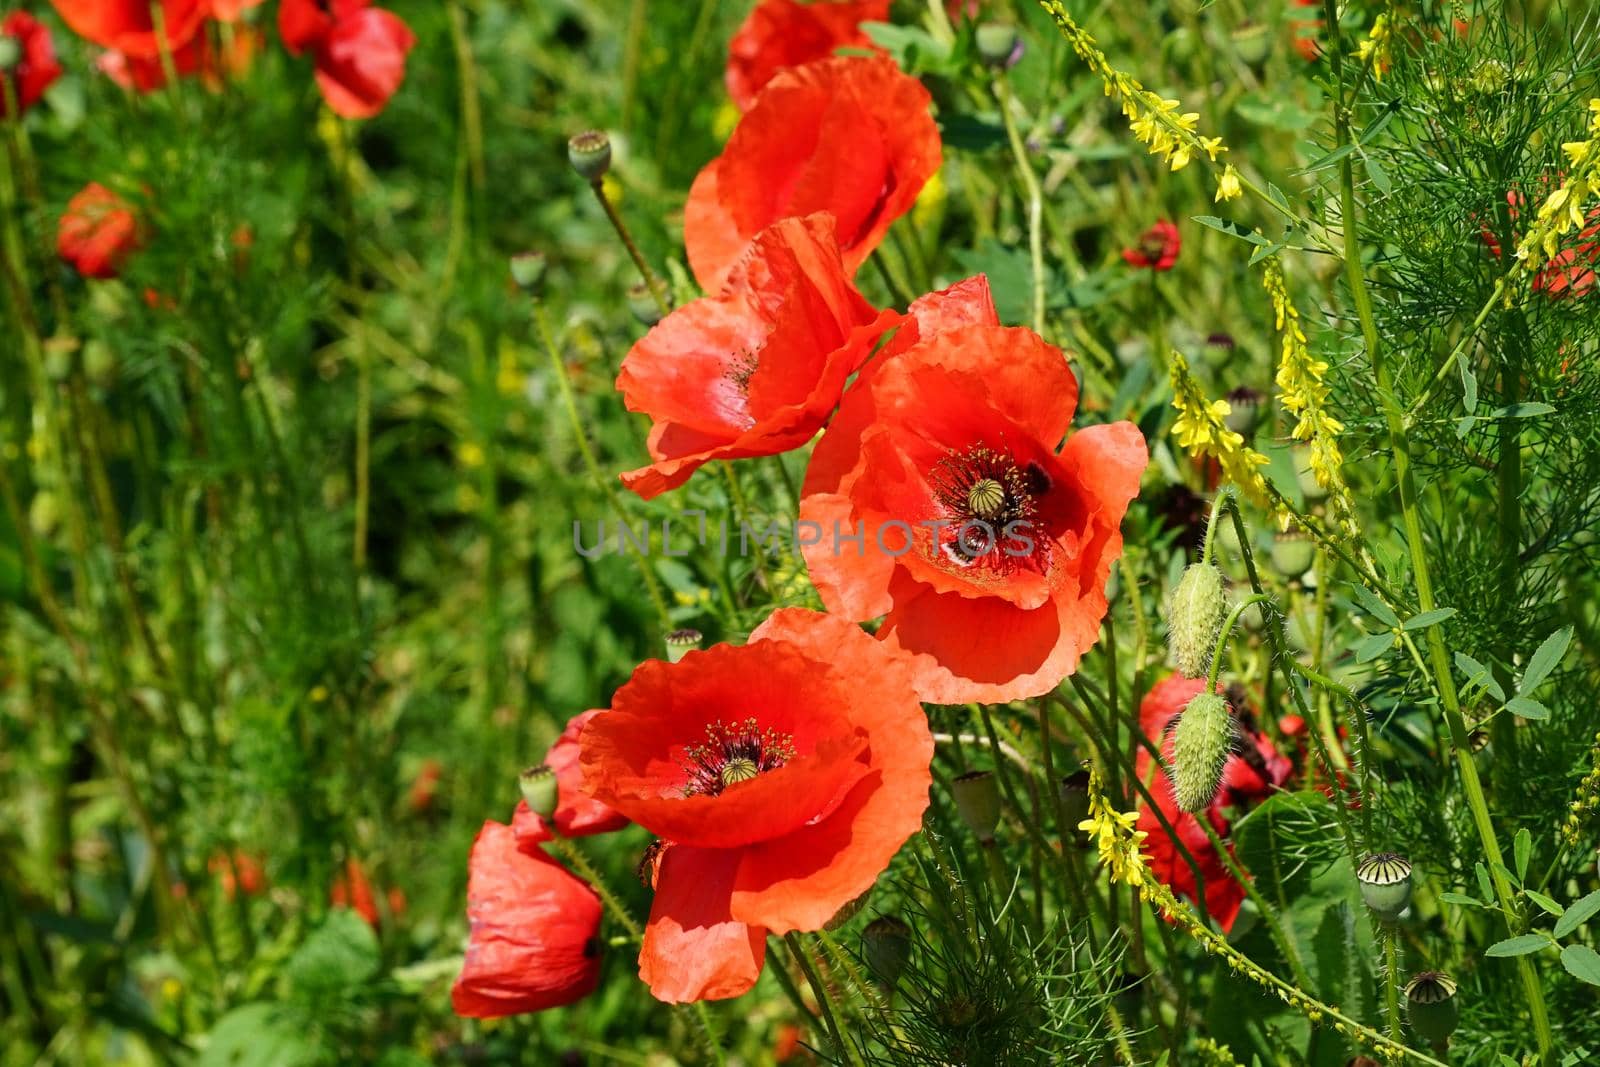 blooming flowers of red poppy on background of bright green grass in the field